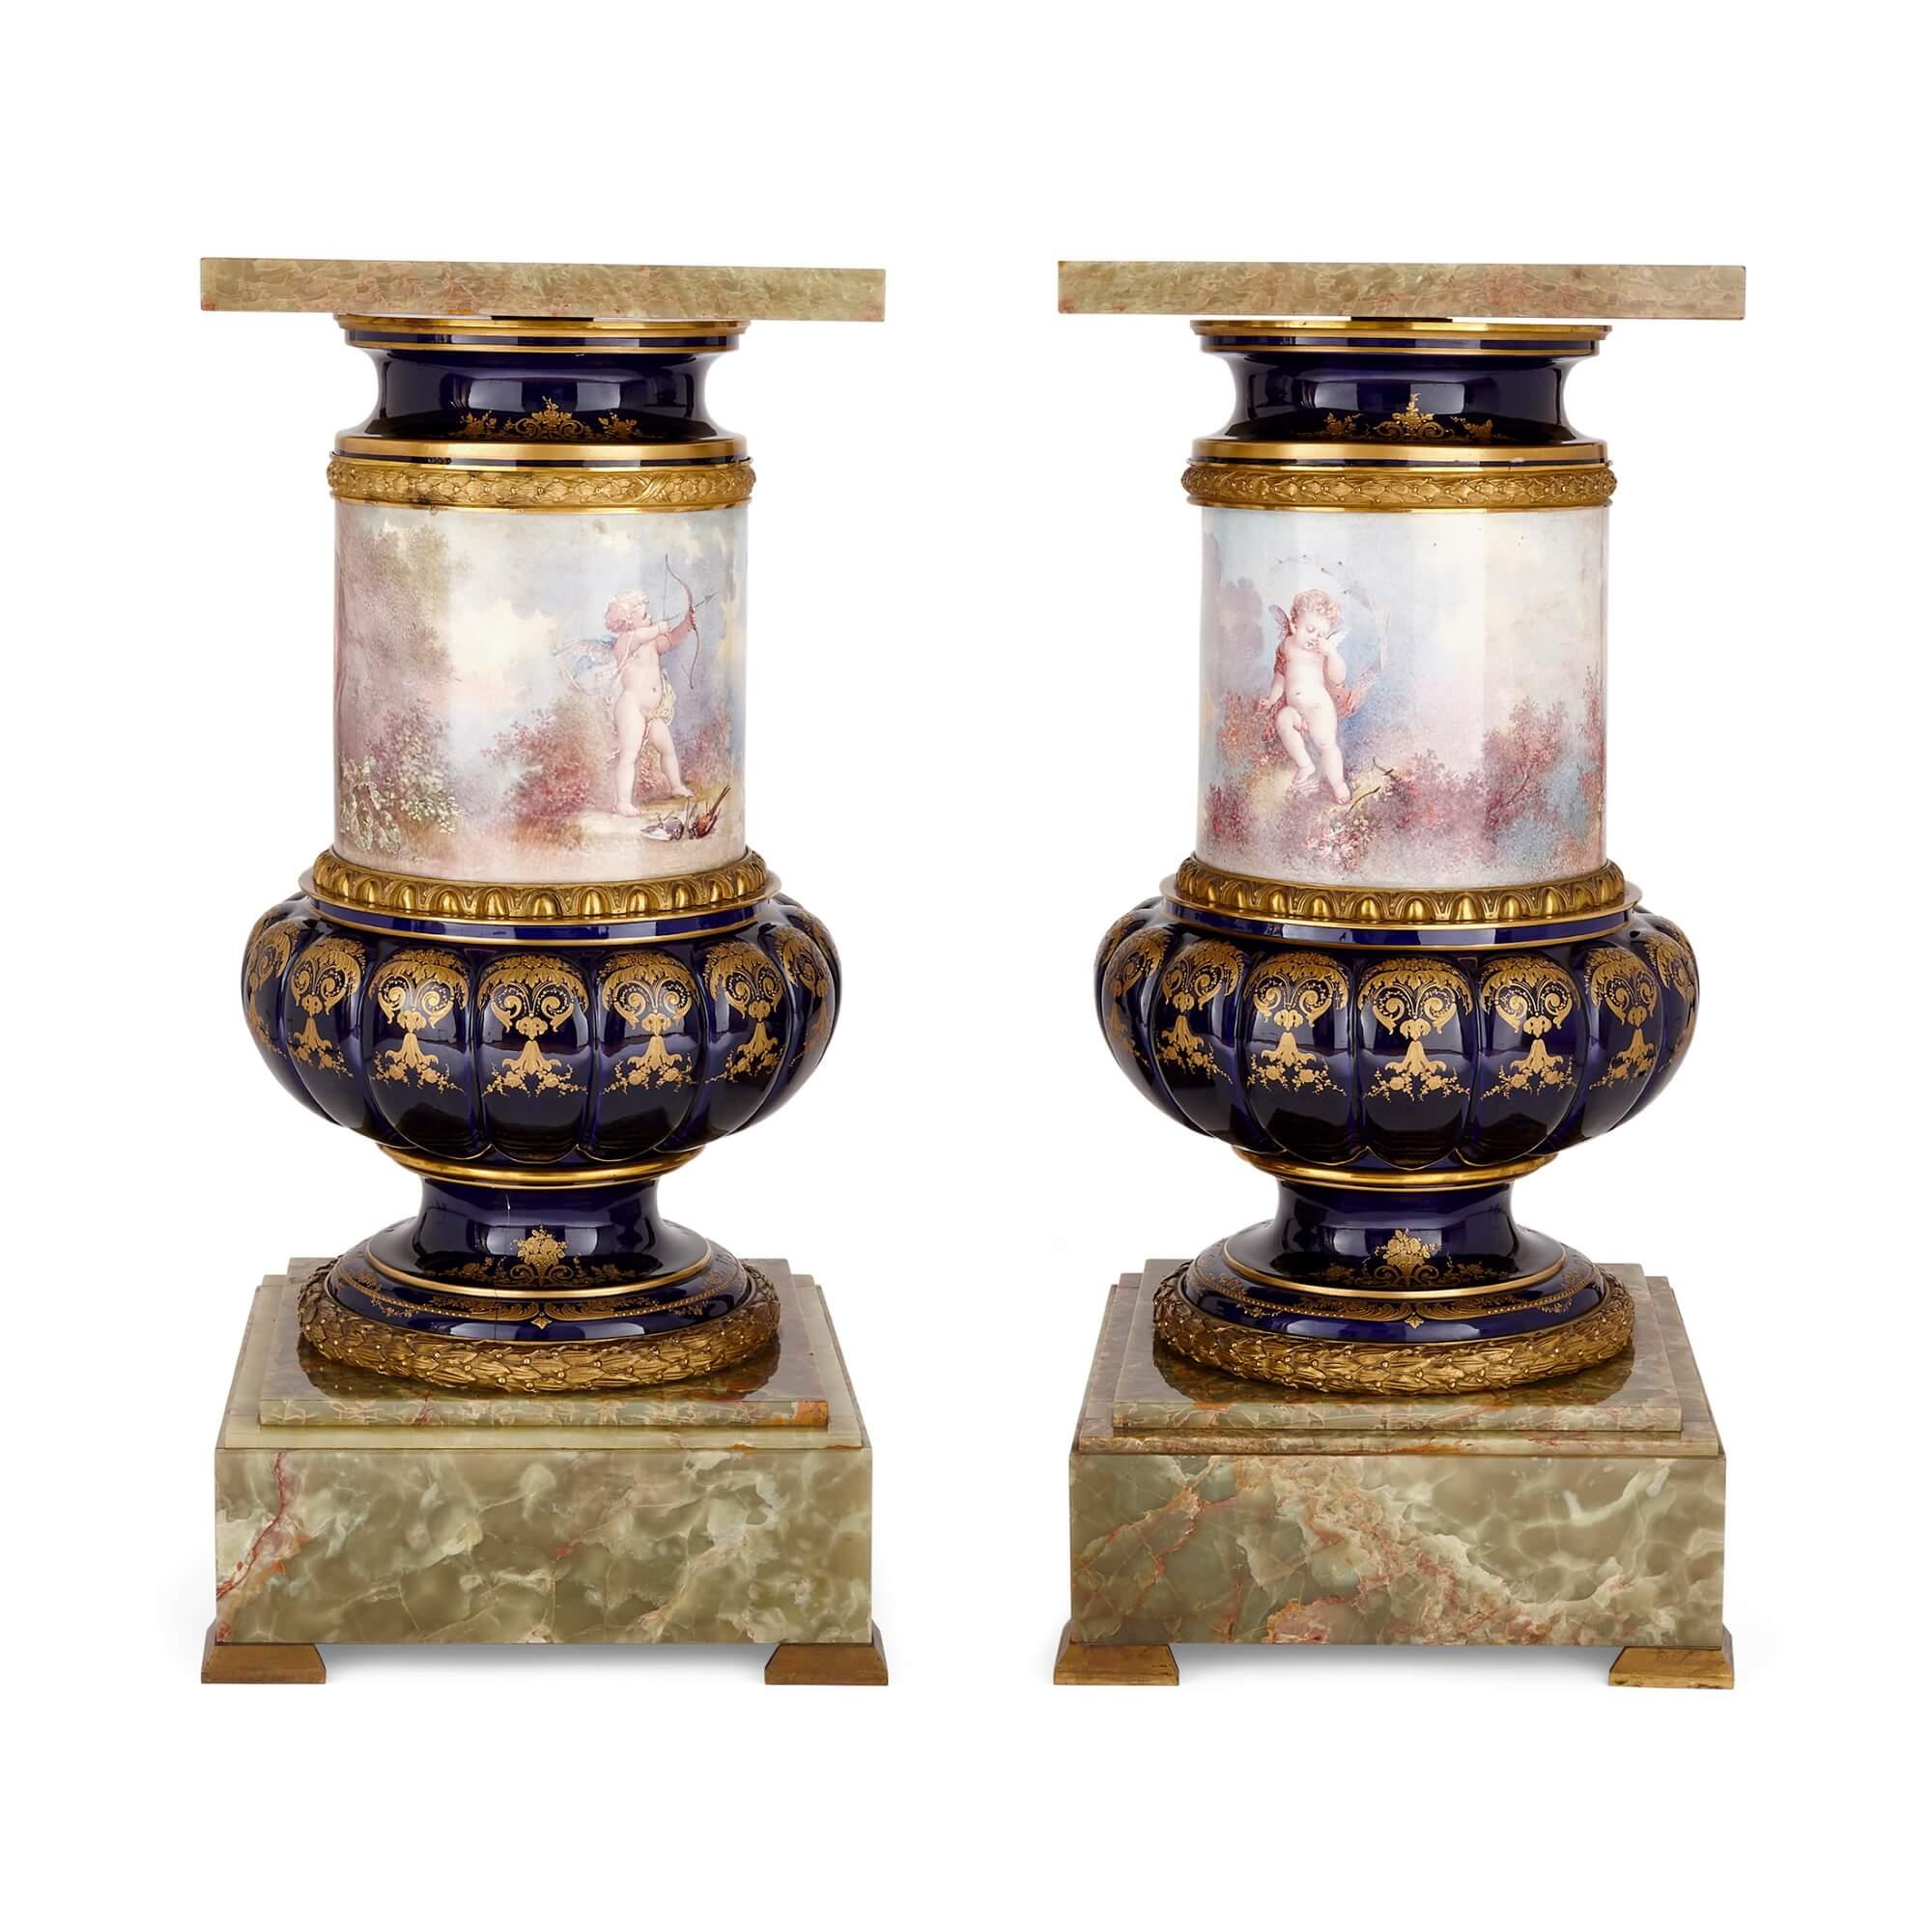 Pair of large Sèvres style pedestals in porcelain, ormolu and green onyx
French, late 19th century
Height 87cm, width 40cm, depth 40cm

These beautiful wares are a pair of large, antique, Sèvres-style pedestals in porcelain, ormolu, and framed